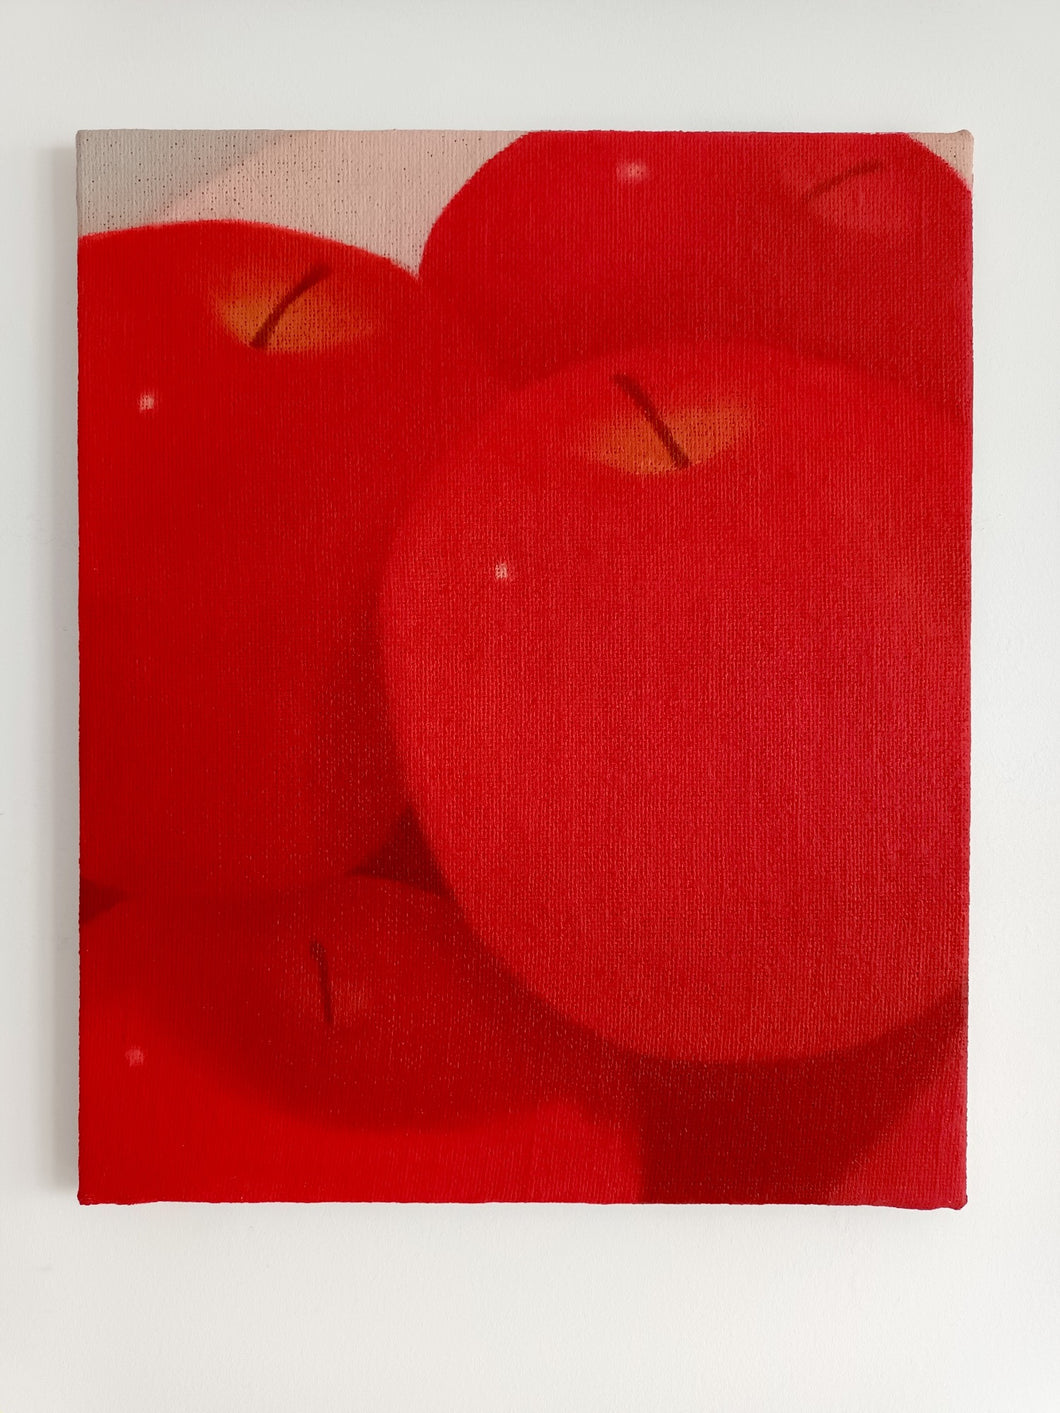 Red Apples ii